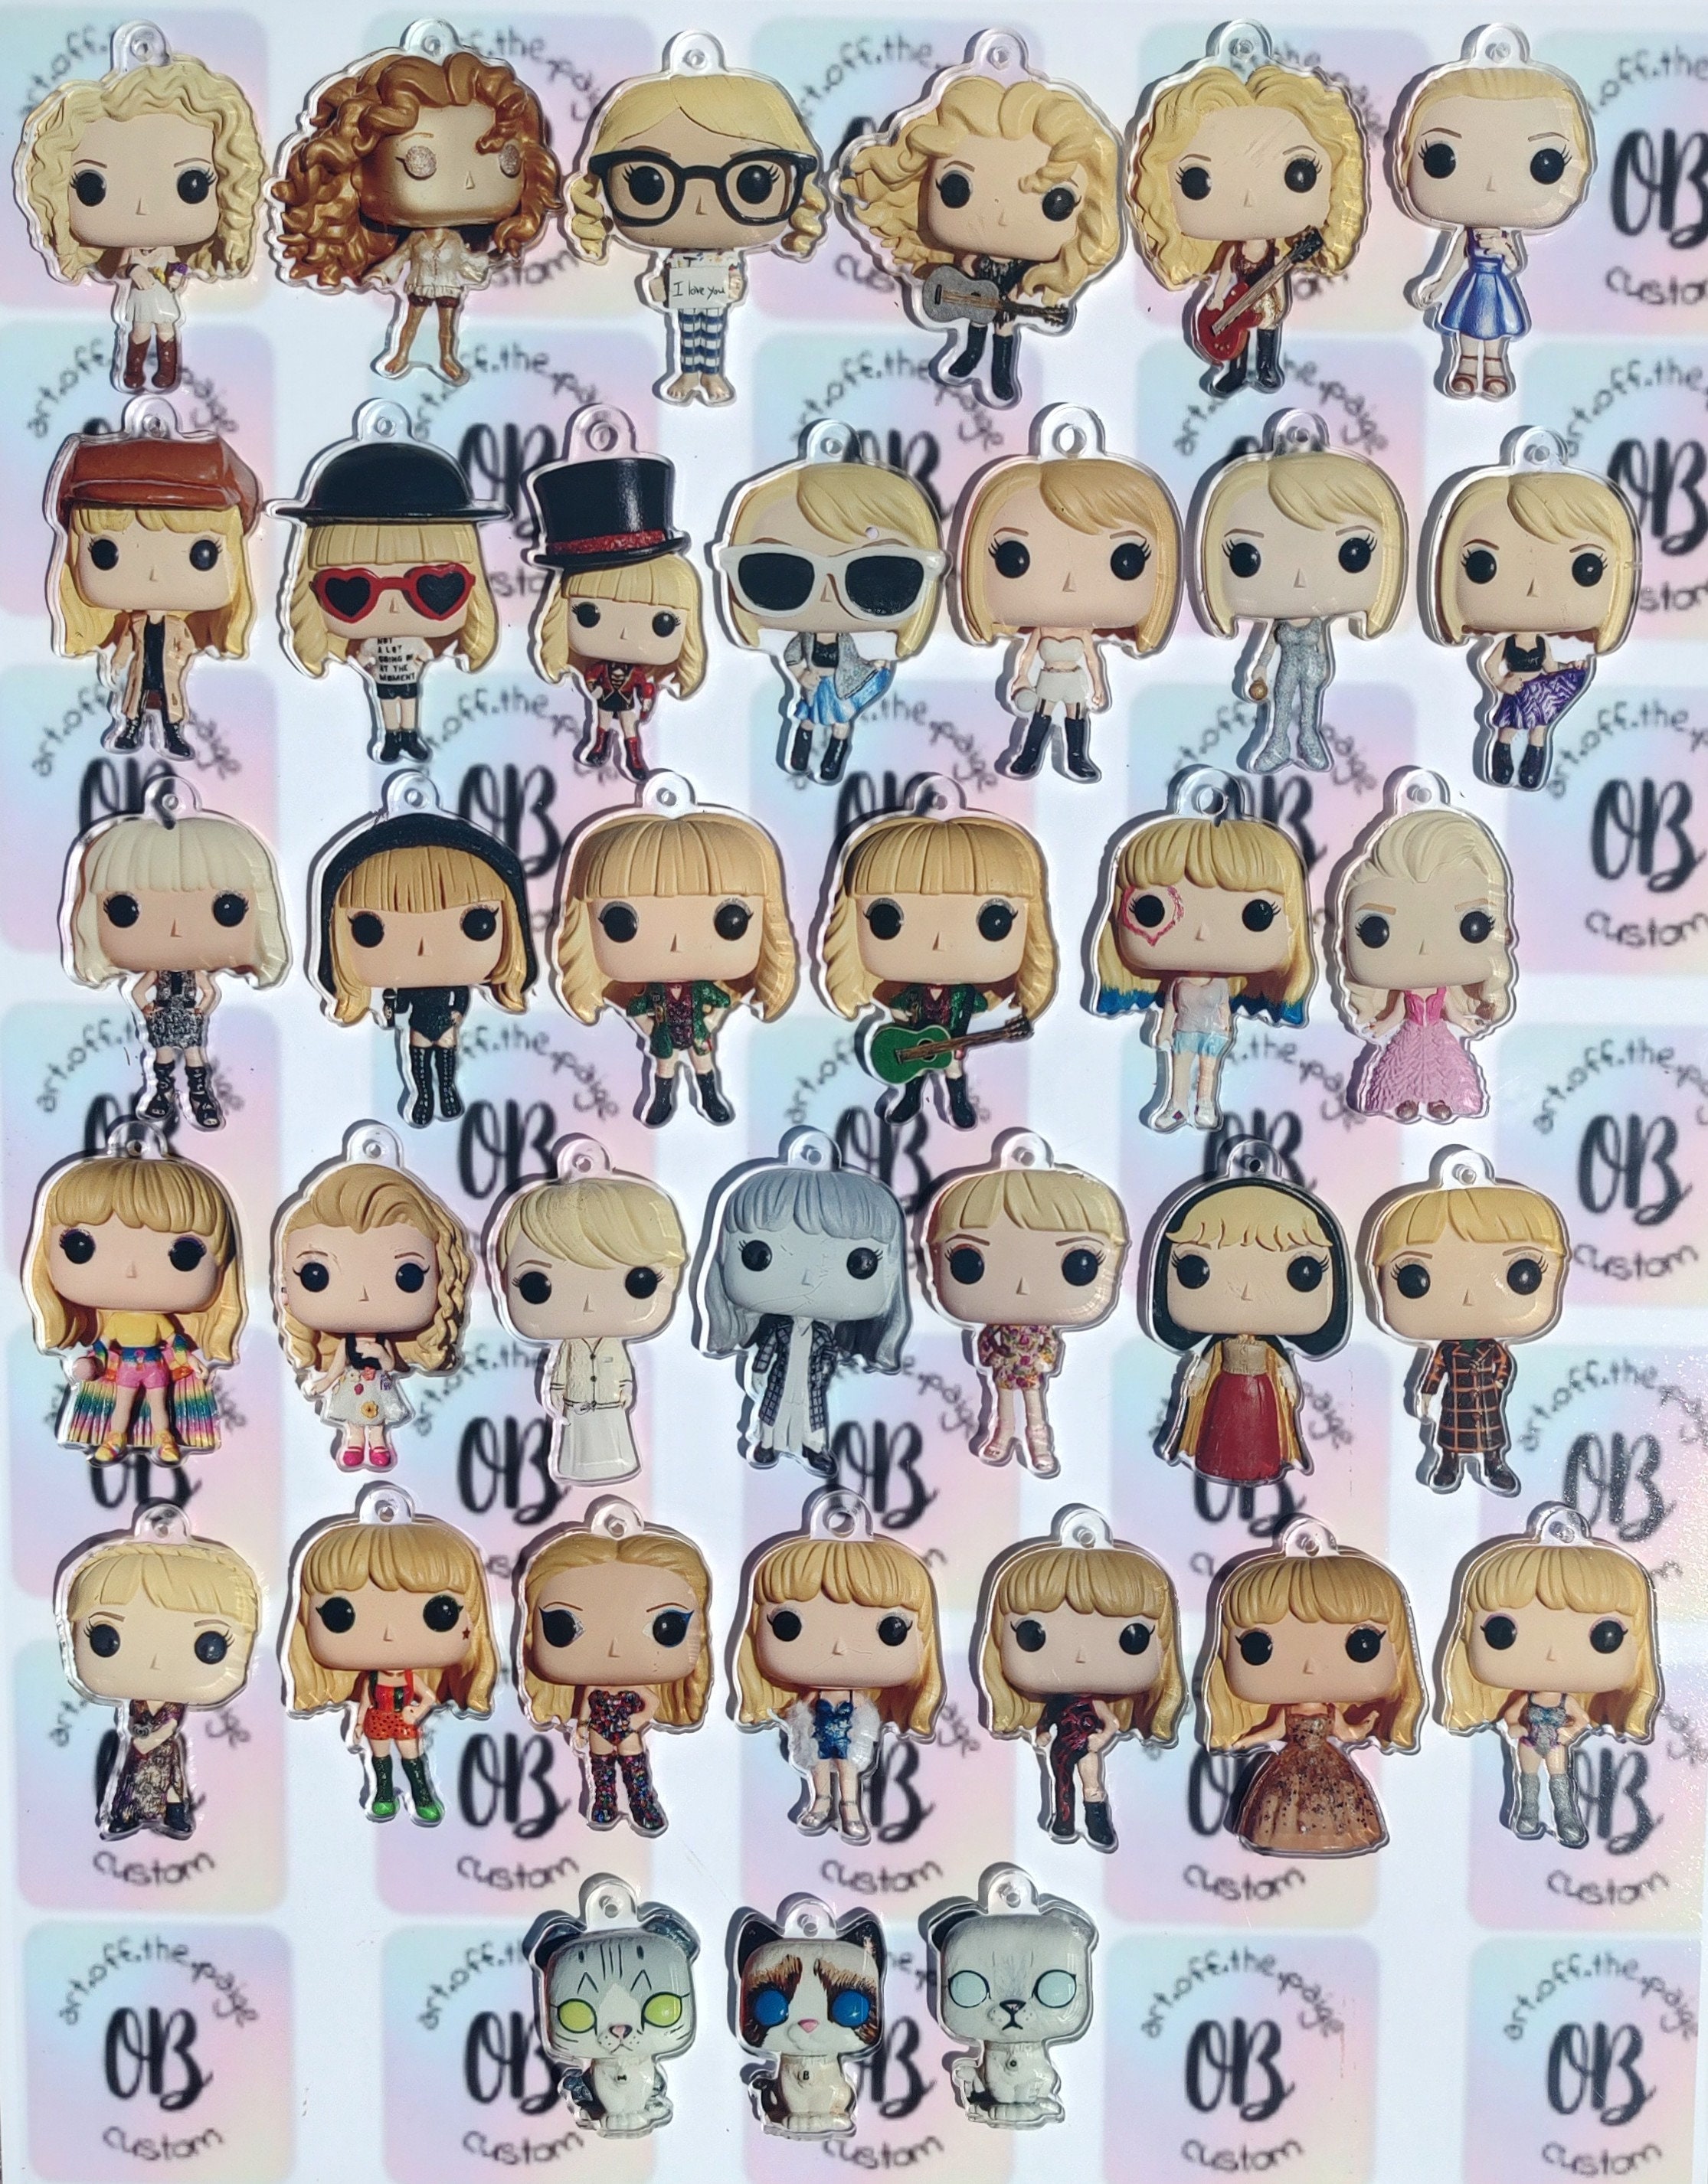 CUSTOM Taylor Swift Hooded Reputation Funko Pop 🖤, Gallery posted by  artoffthepaige